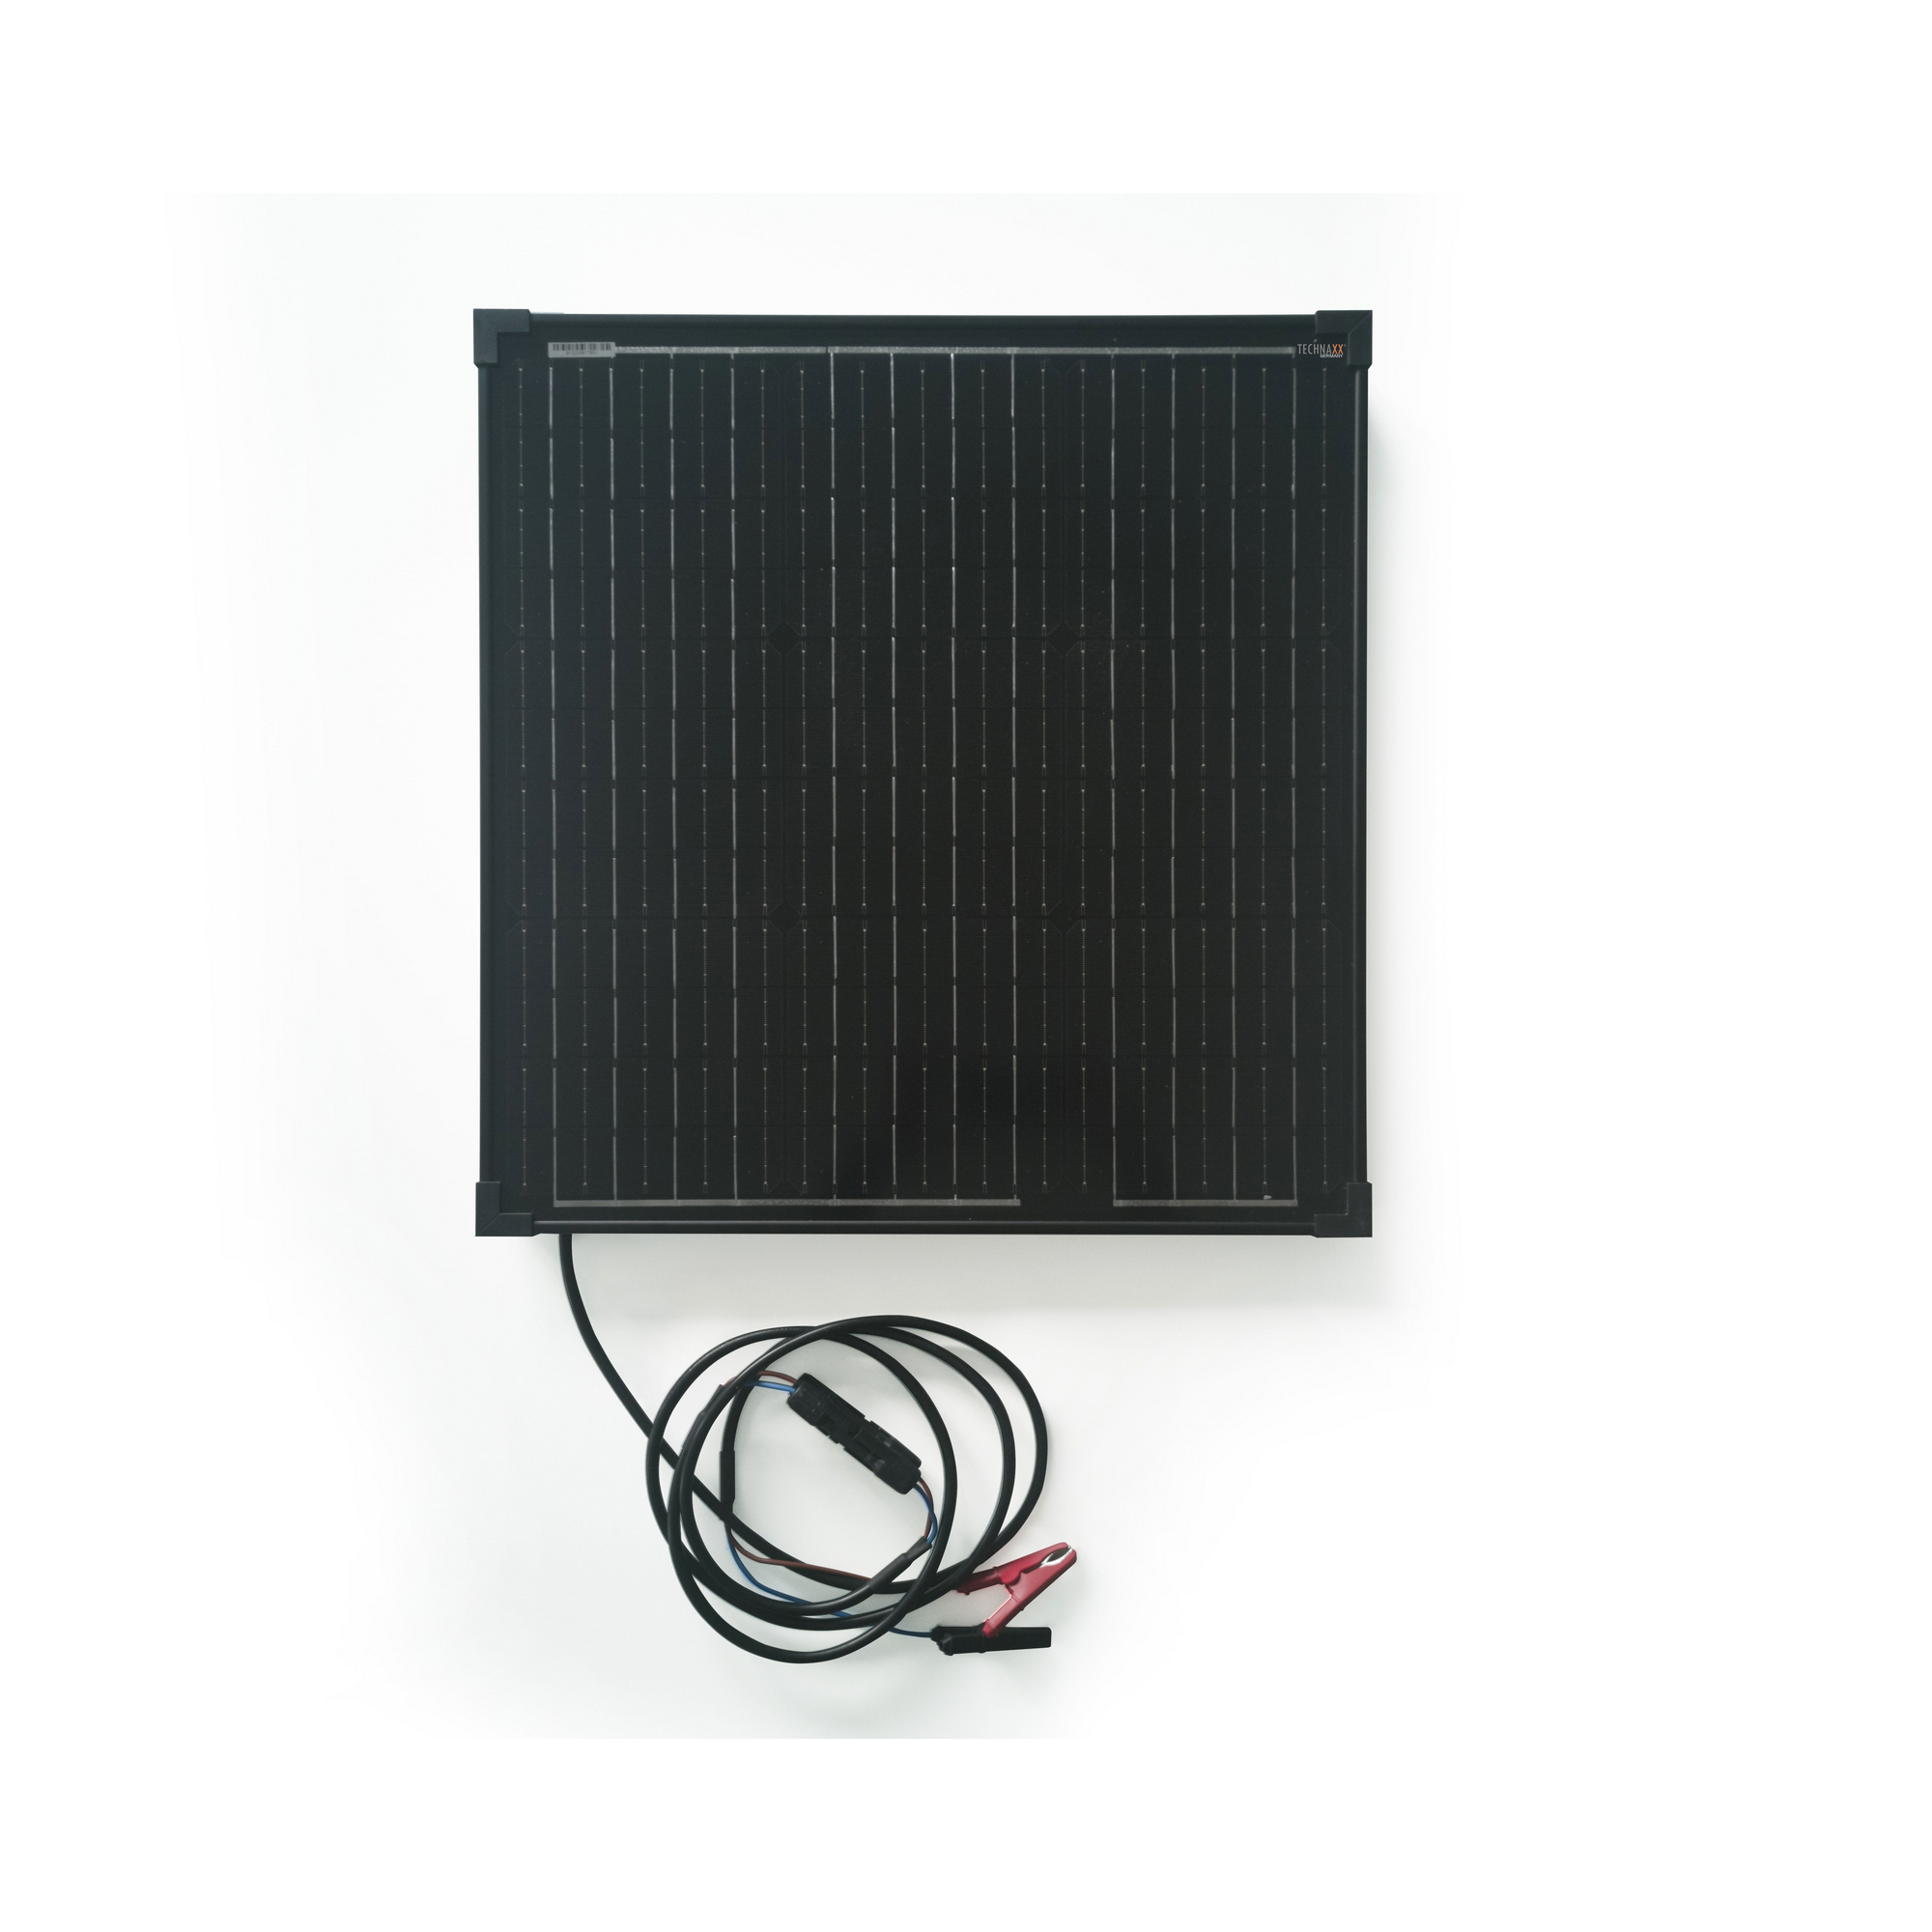 Solar Lade-Set 'TX-214' 50 W + product picture